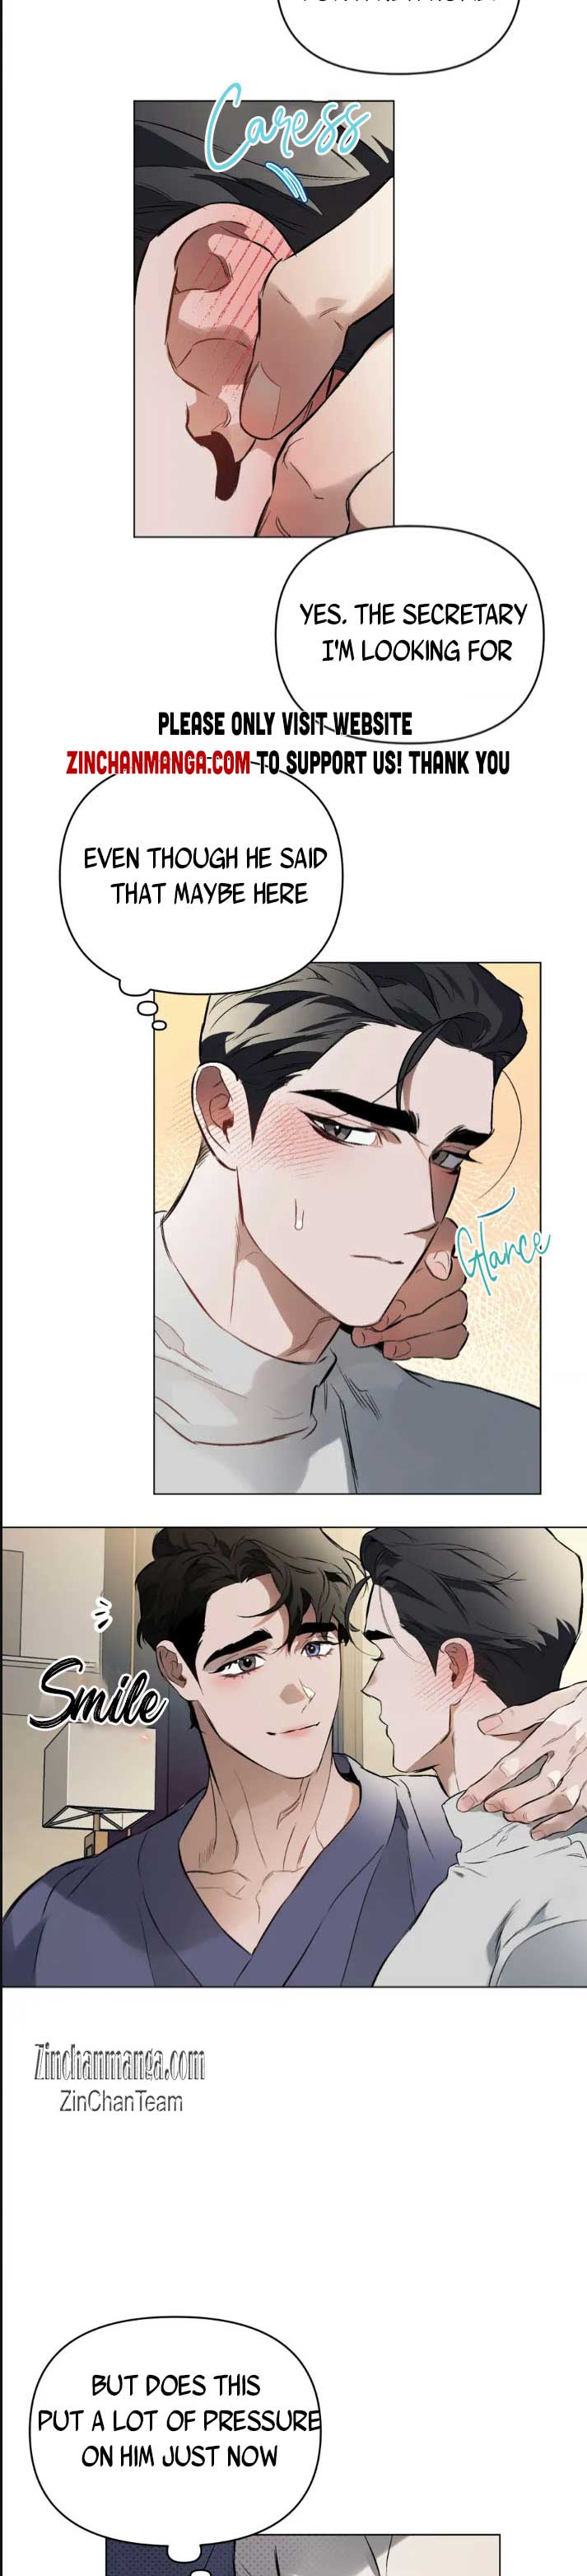 Define The Relationship (Yaoi) - Page 4